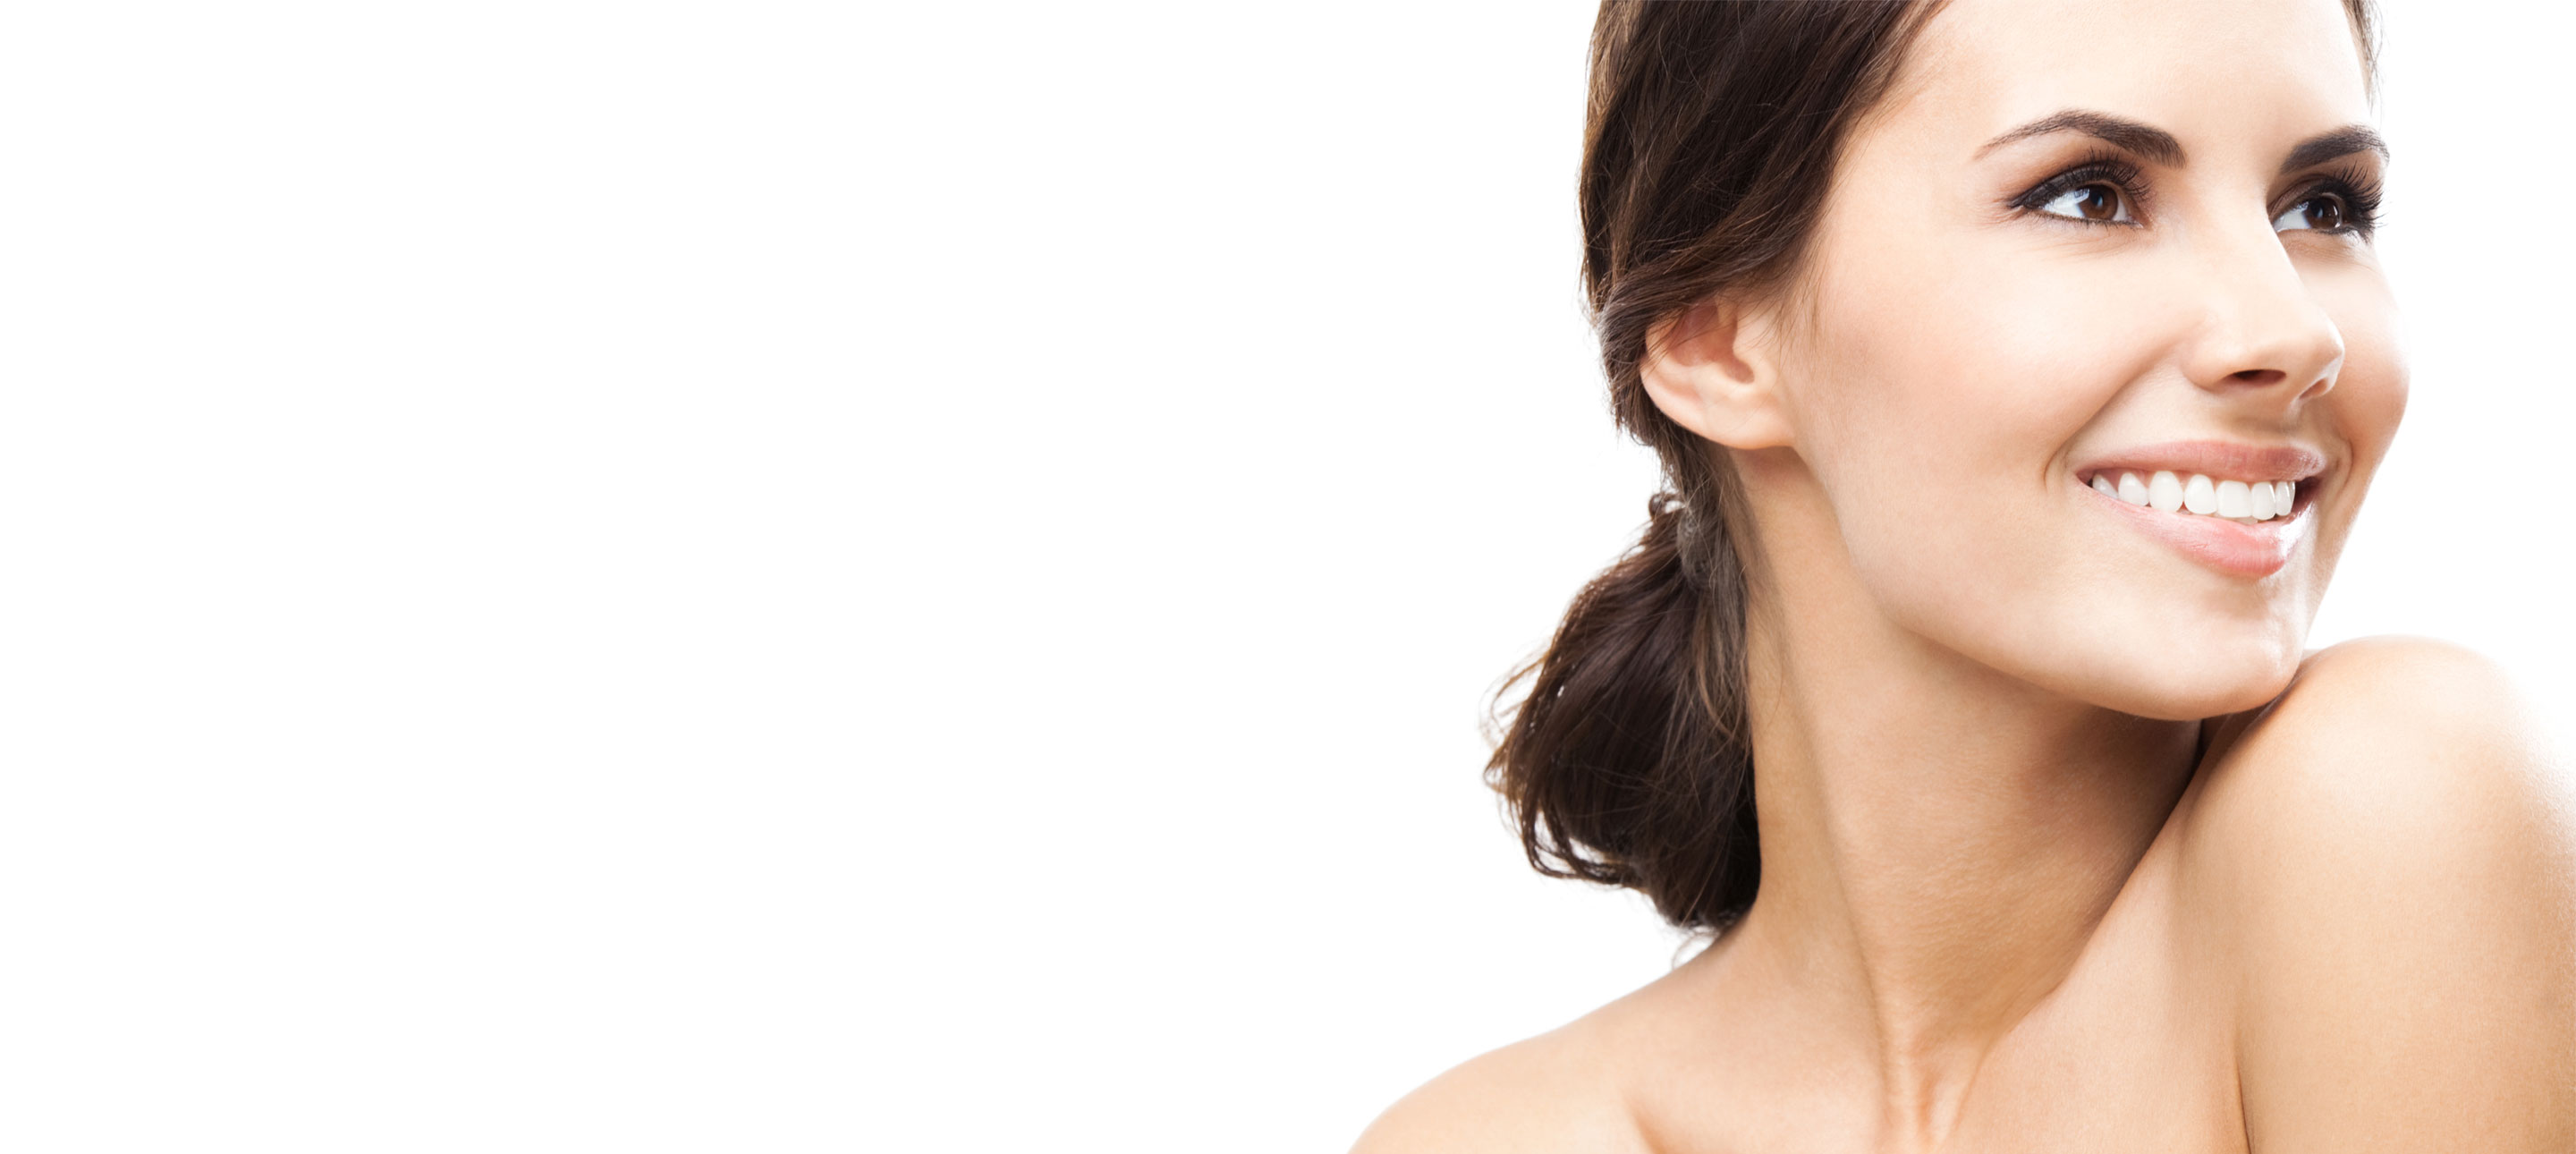 8 Nose Job Myths, Busted Once and for All - UtBreastAugmentation